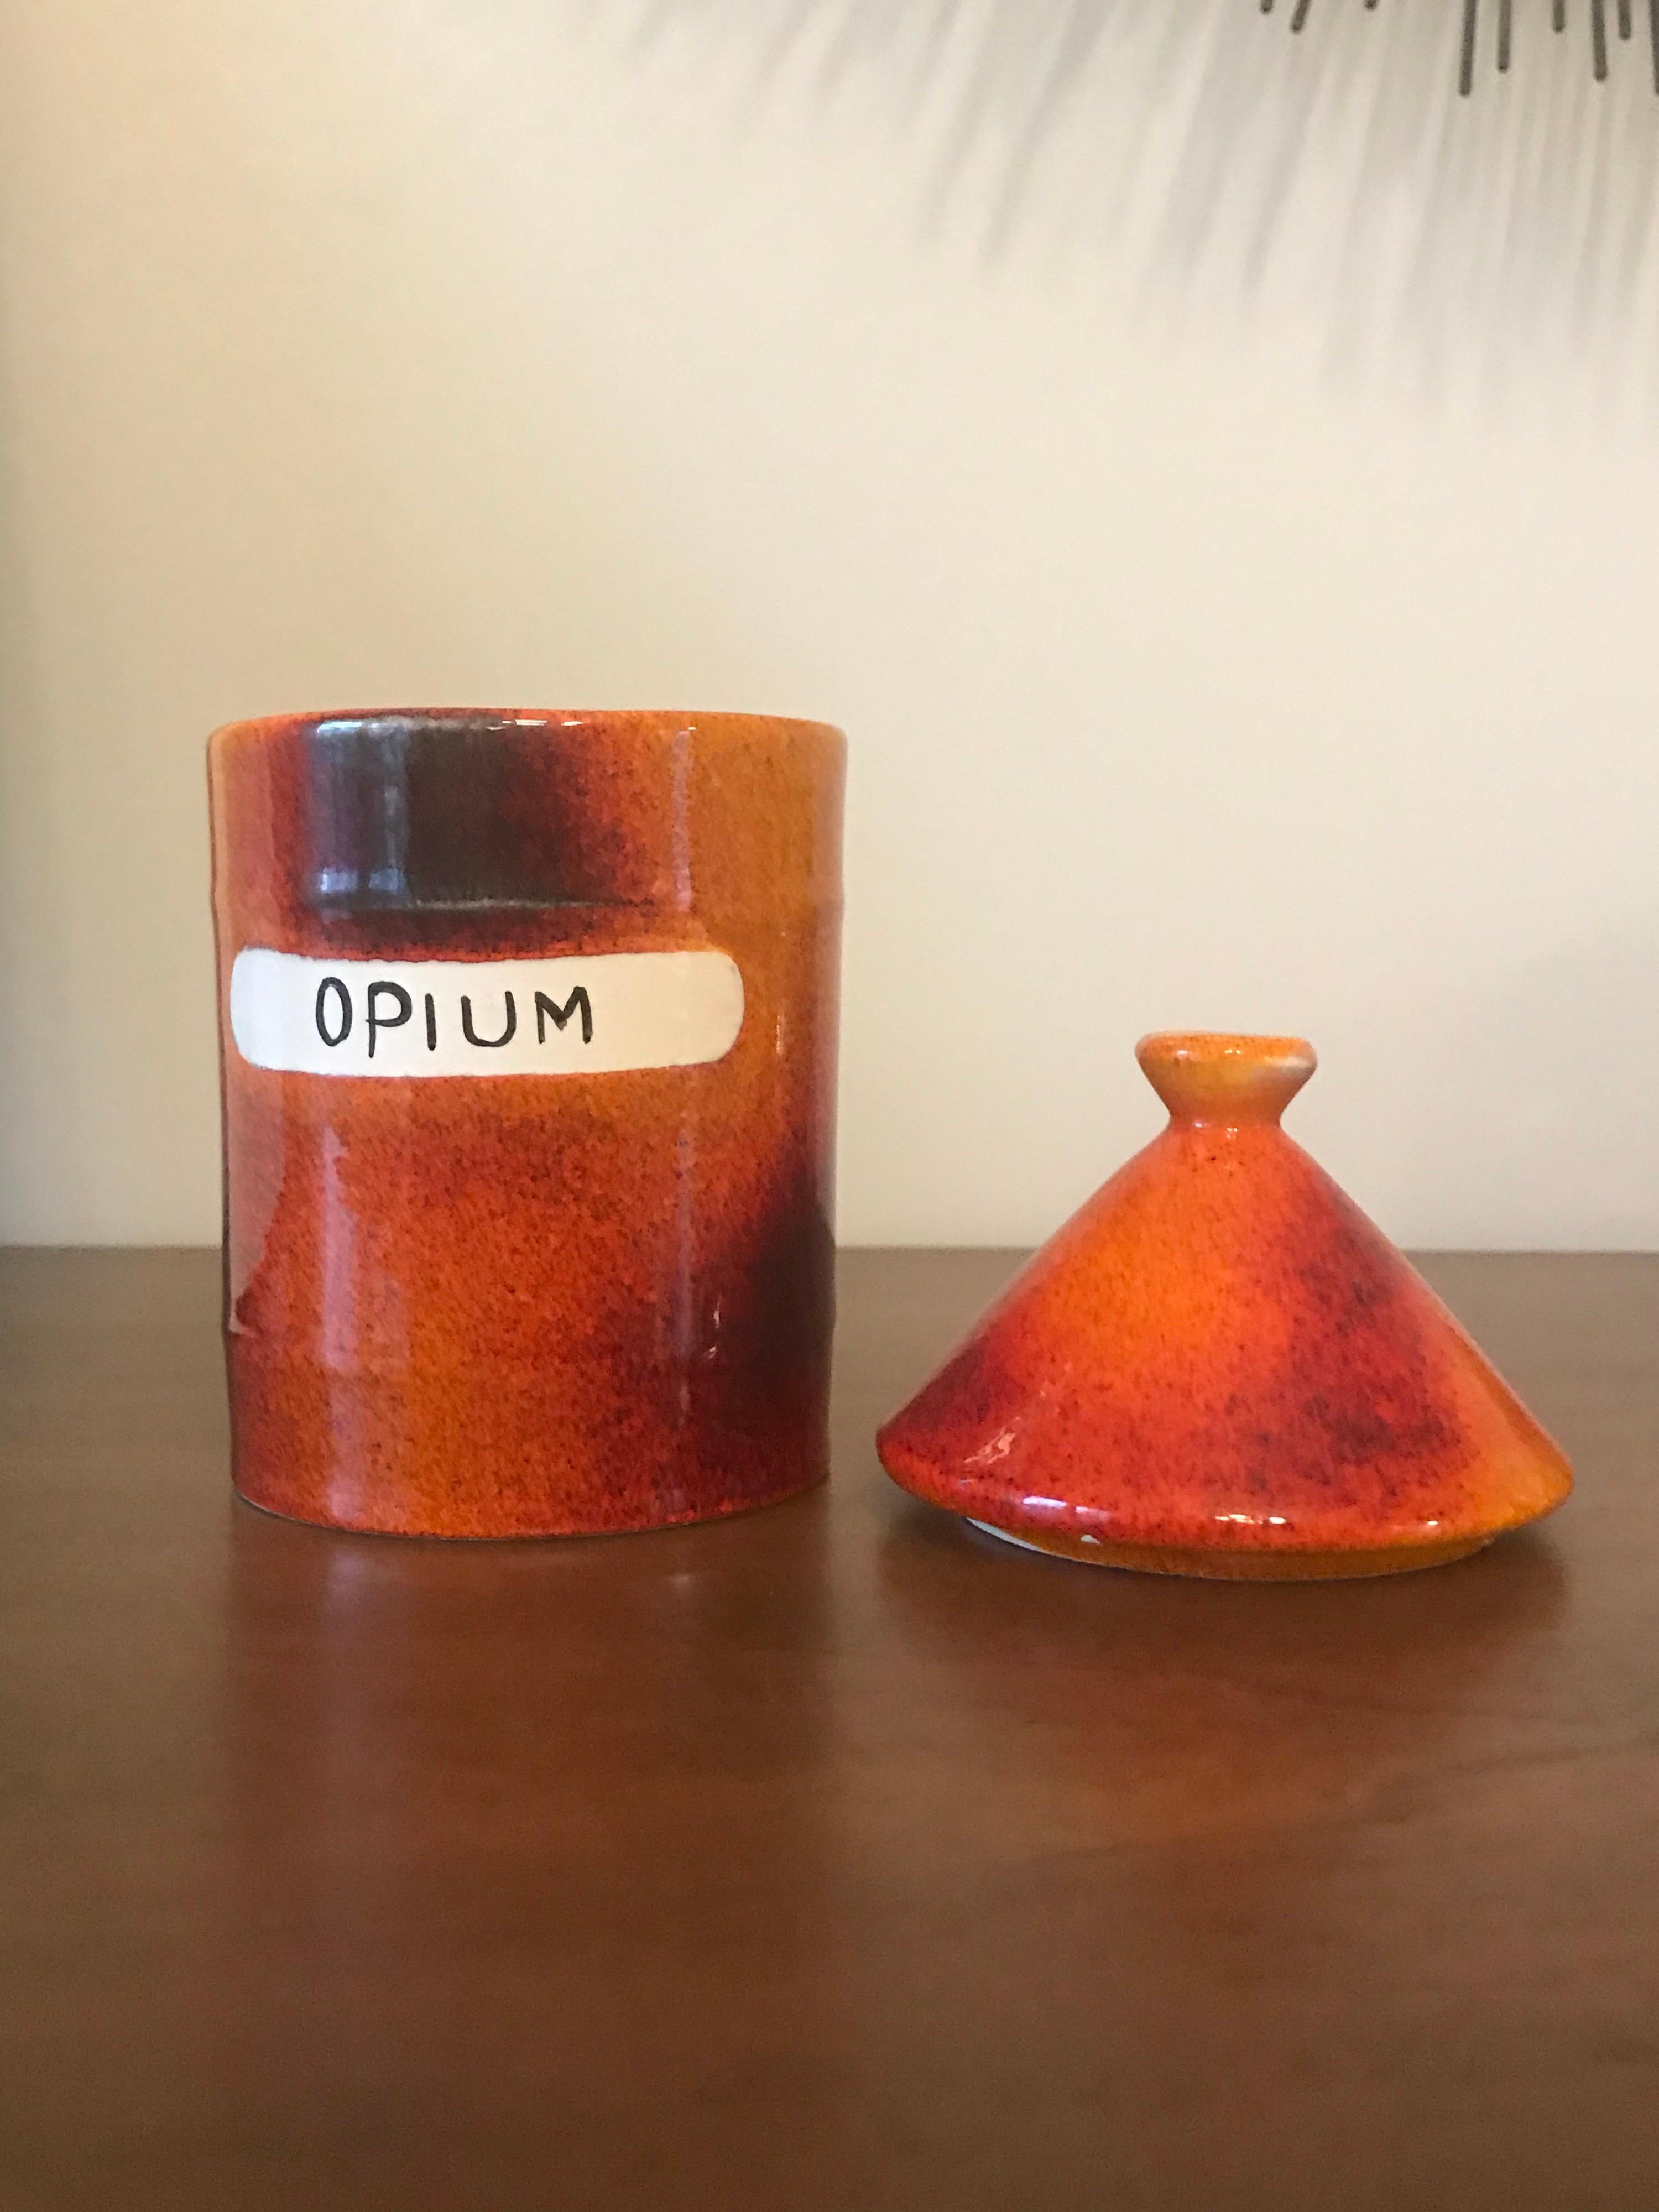 Mid-20th Century Opium Dope/ Vice Jar by Alvino Bagni for Raymor